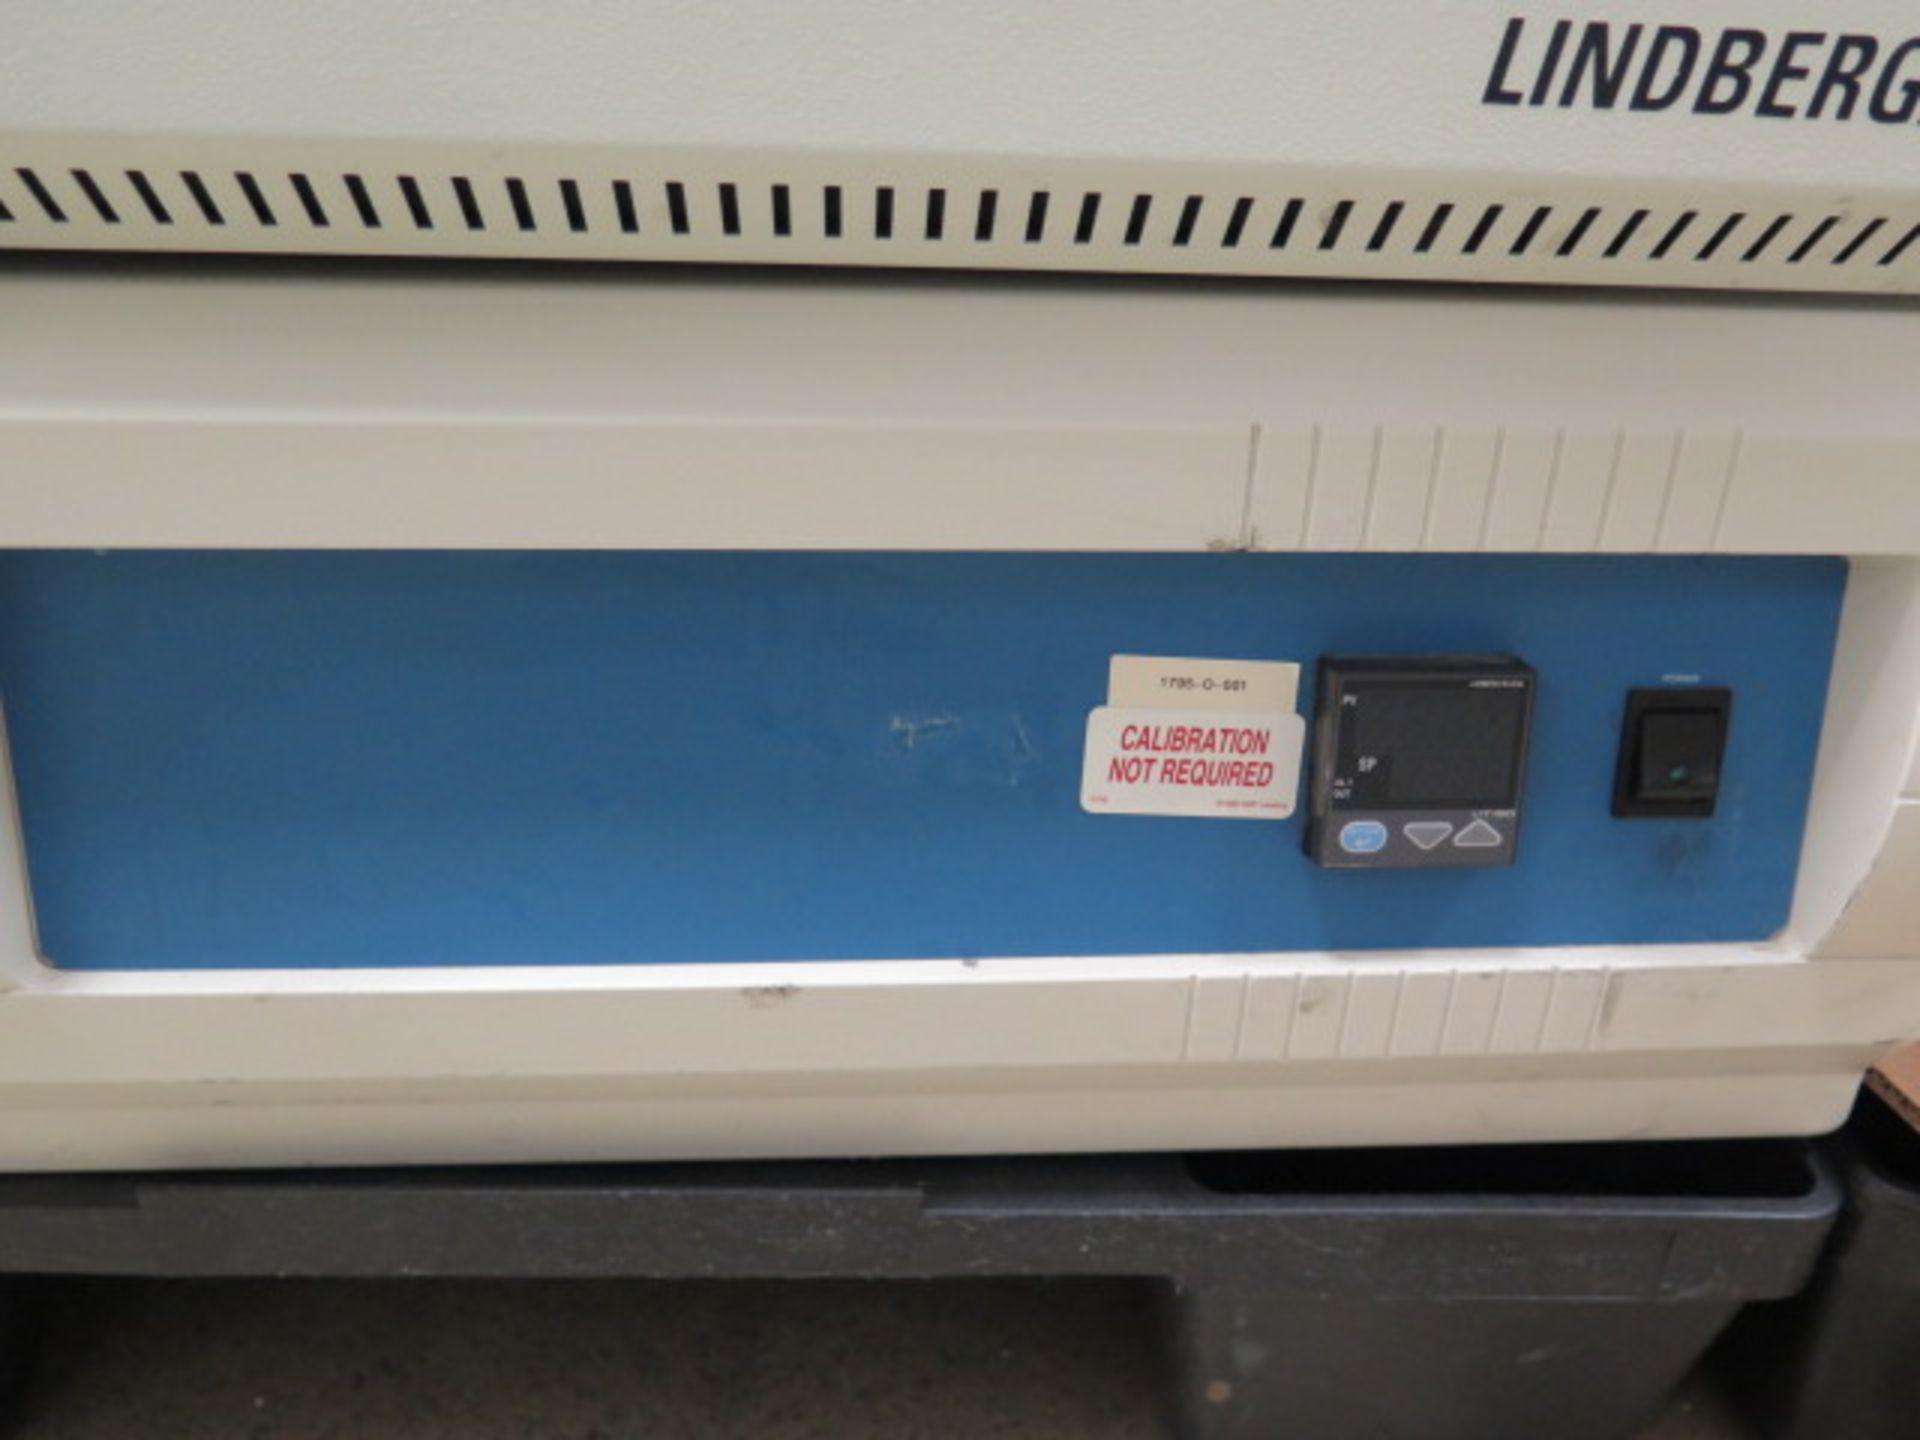 Thermo Electron Lindberg / BlueM mdl. MO1440A-1 Oven s/n Z15R-509008-ZR 300 Degrees C, SOLD AS IS - Image 5 of 8